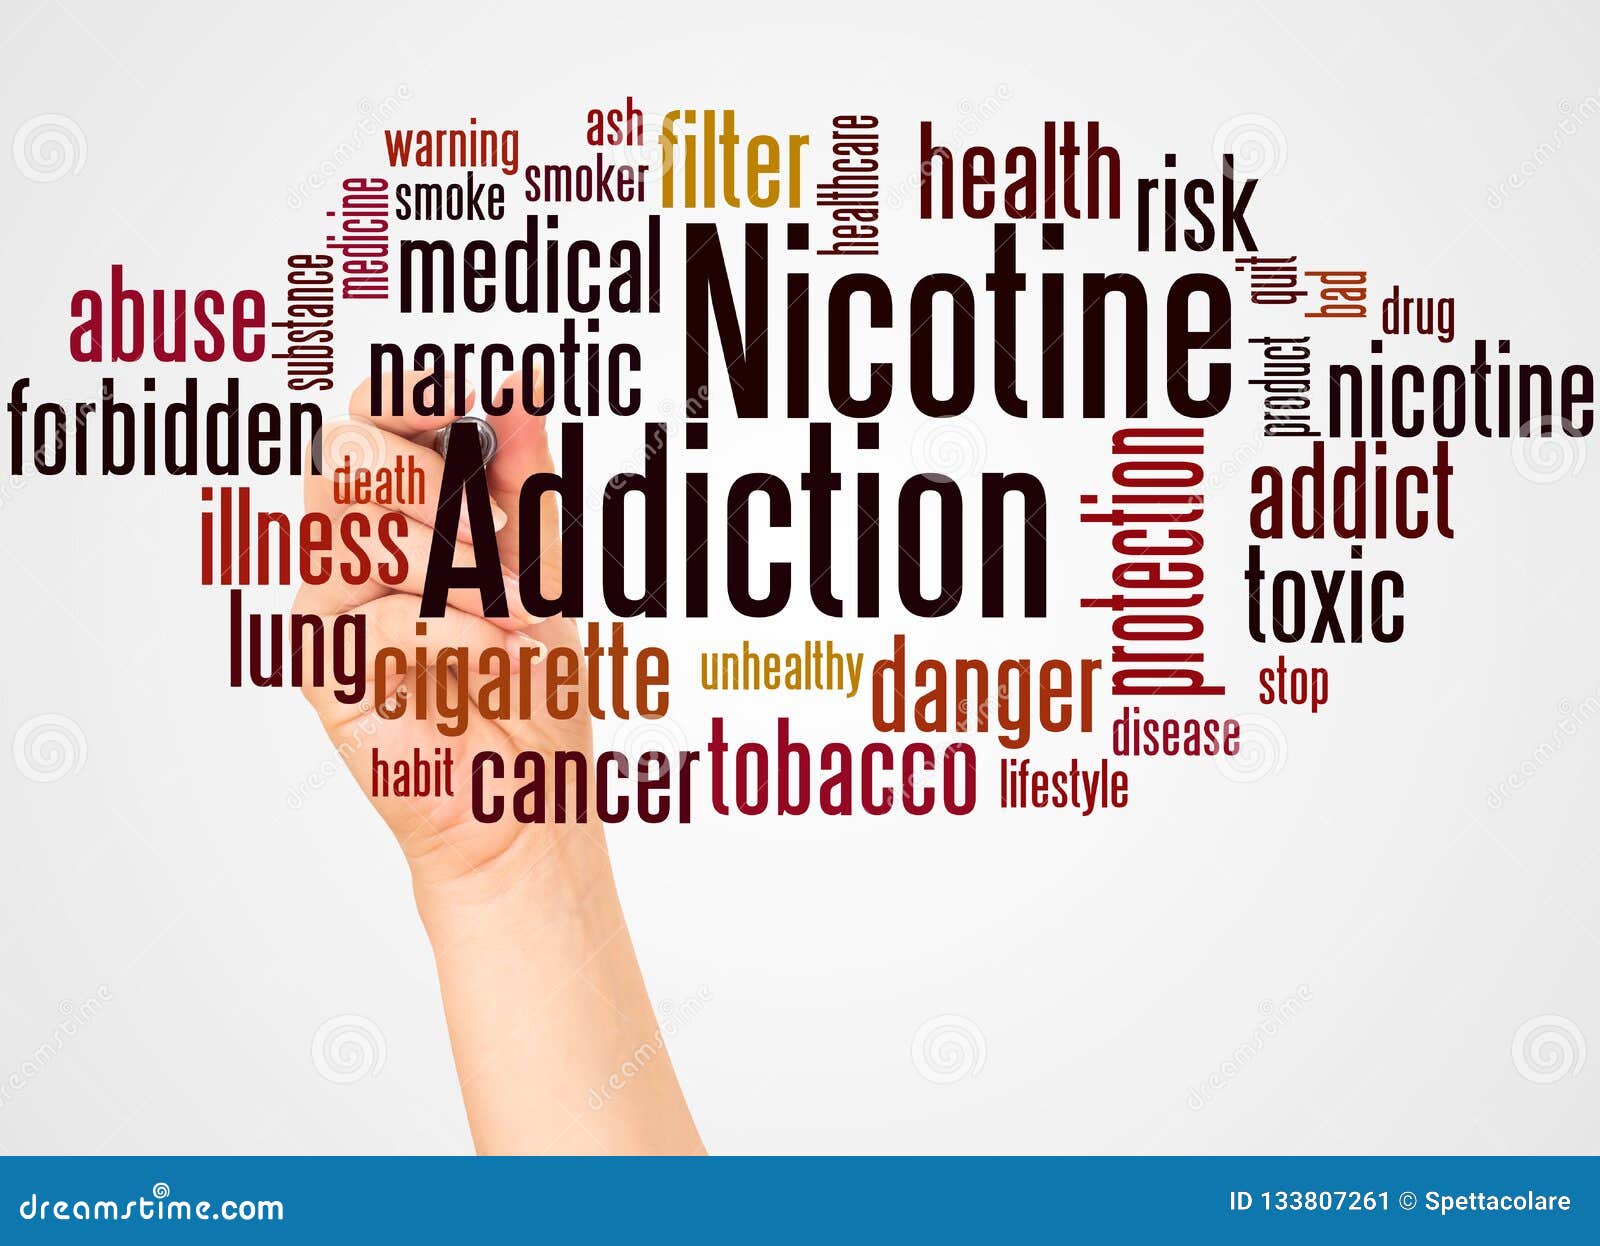 nicotine addiction word cloud and hand with marker concept